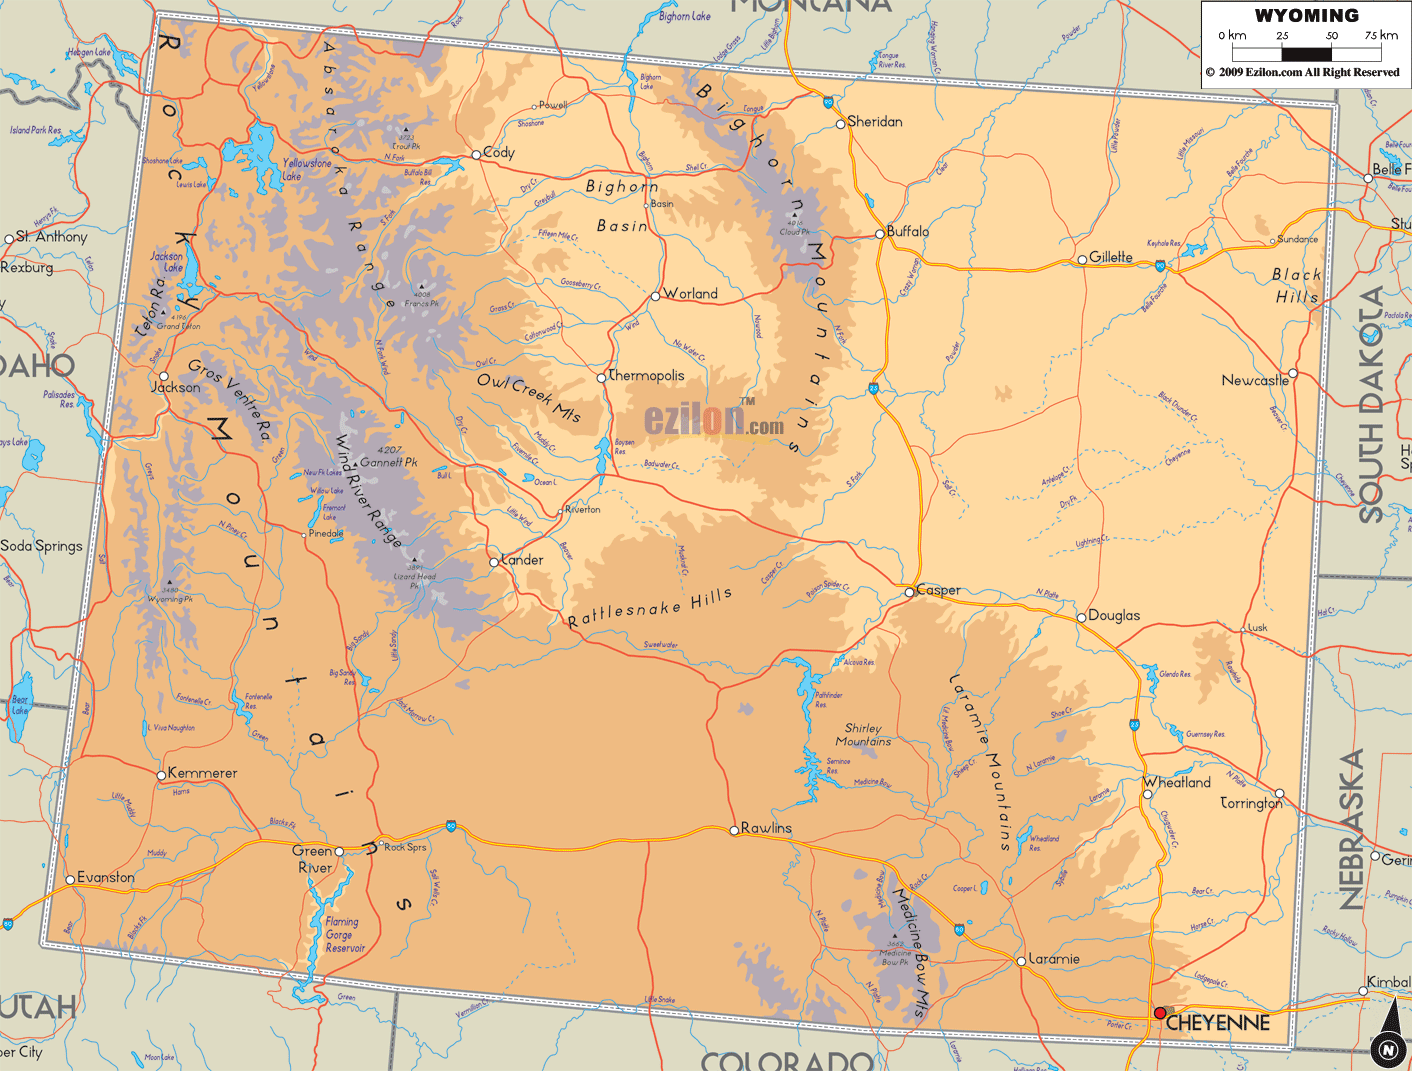 The Physical map of Wyoming State, USA showing major geographical features such as rivers, lakes, topography and land formations.